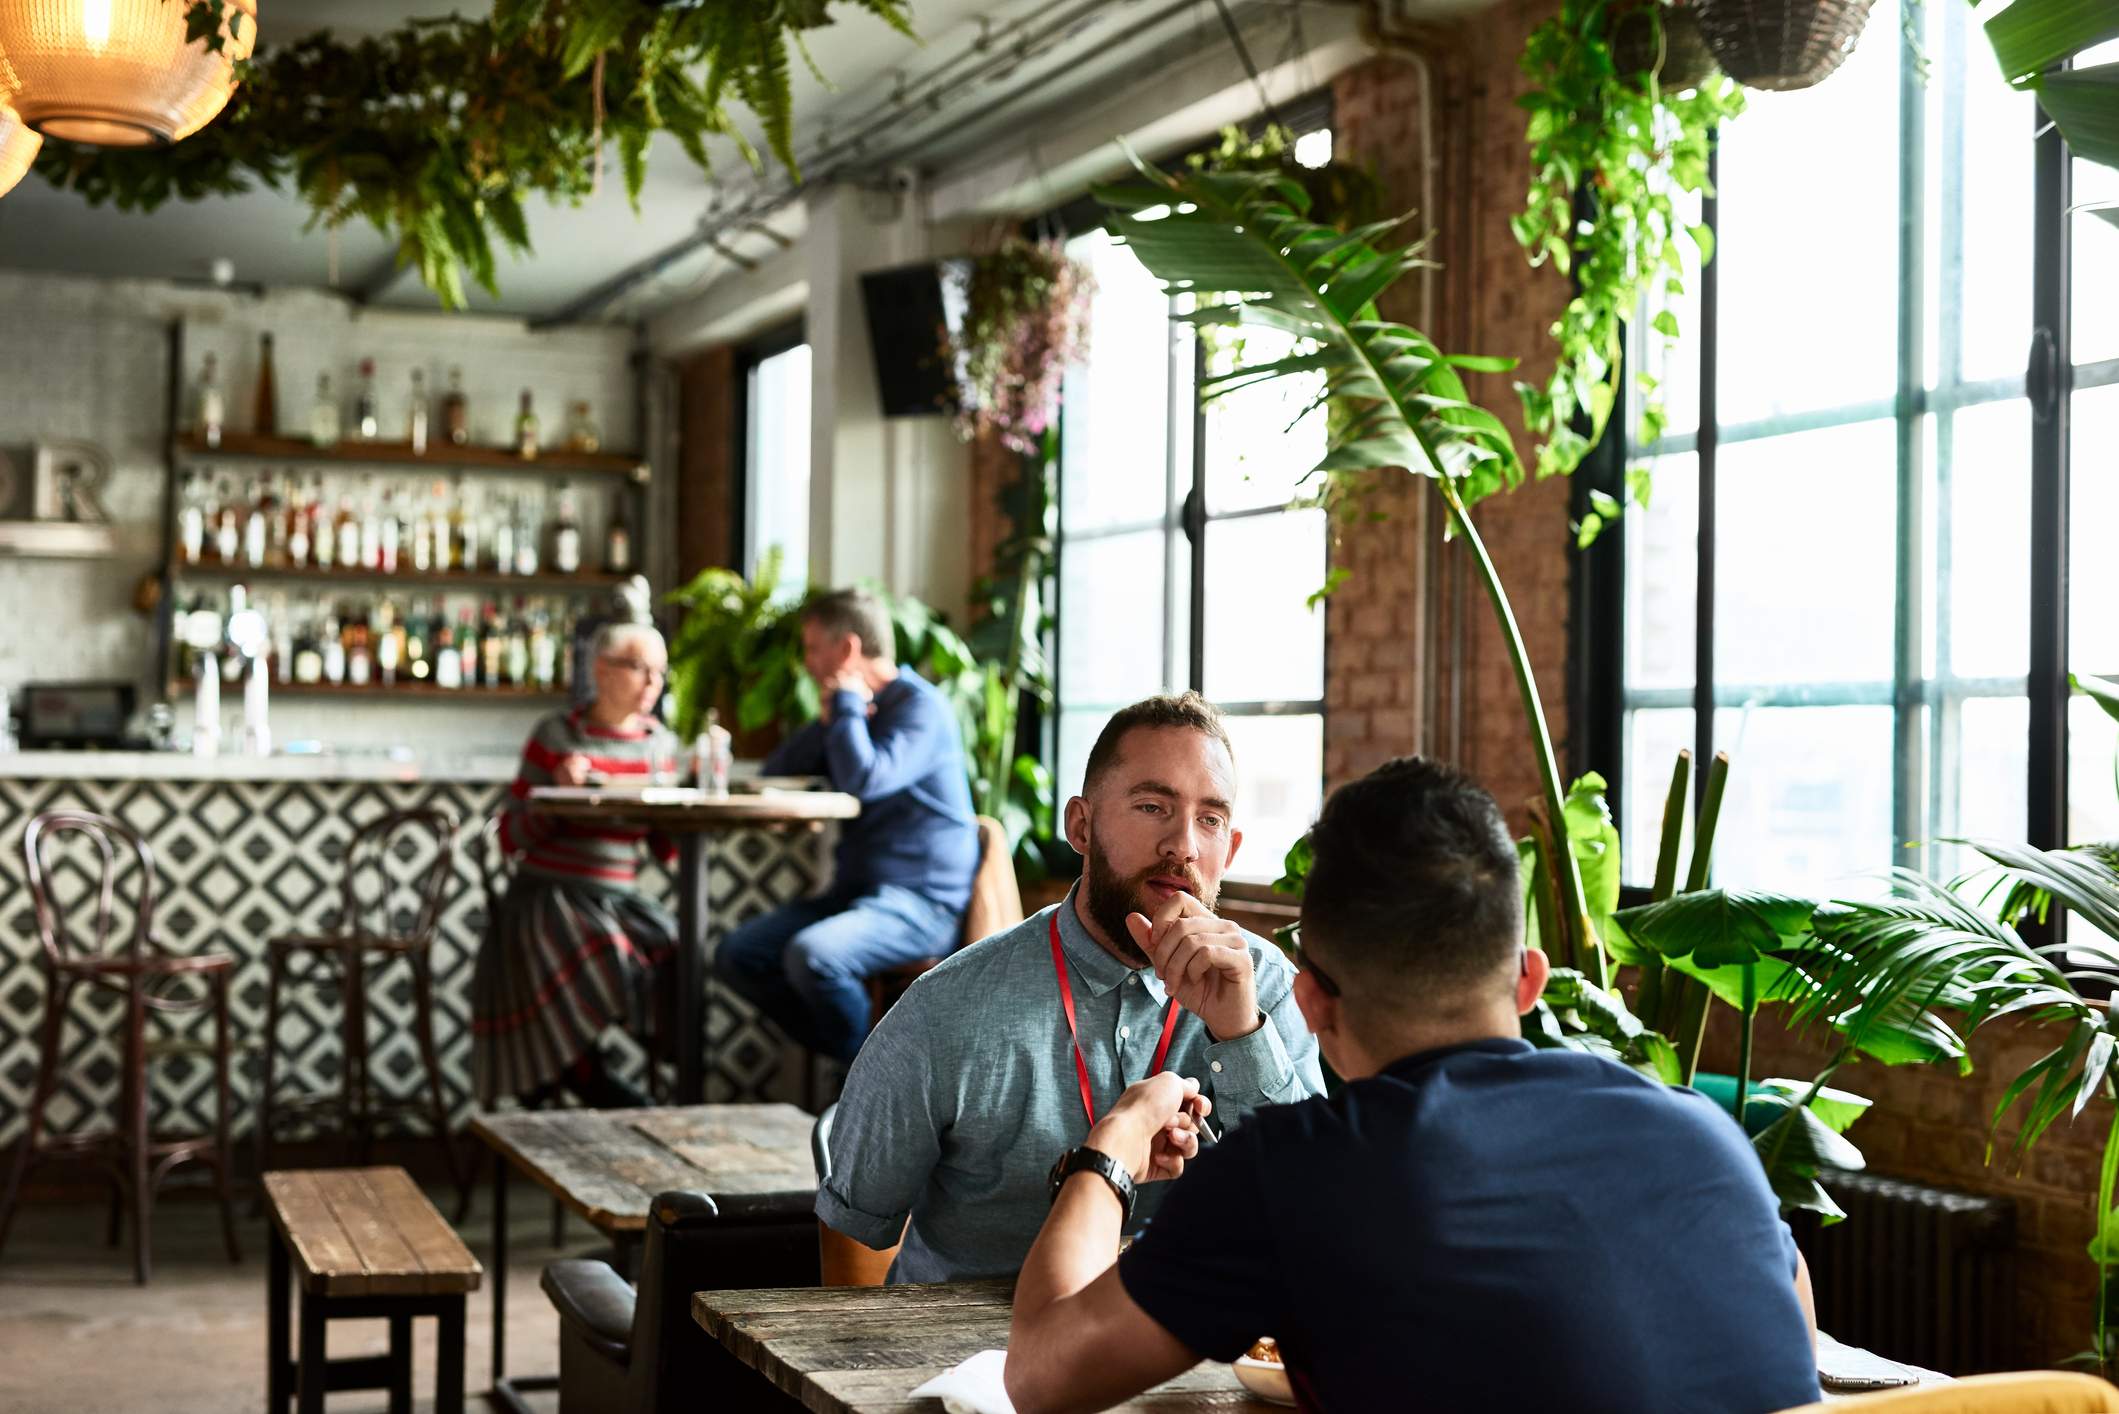 Image depicts two people speaking during an interview in a plant filled restaurant.